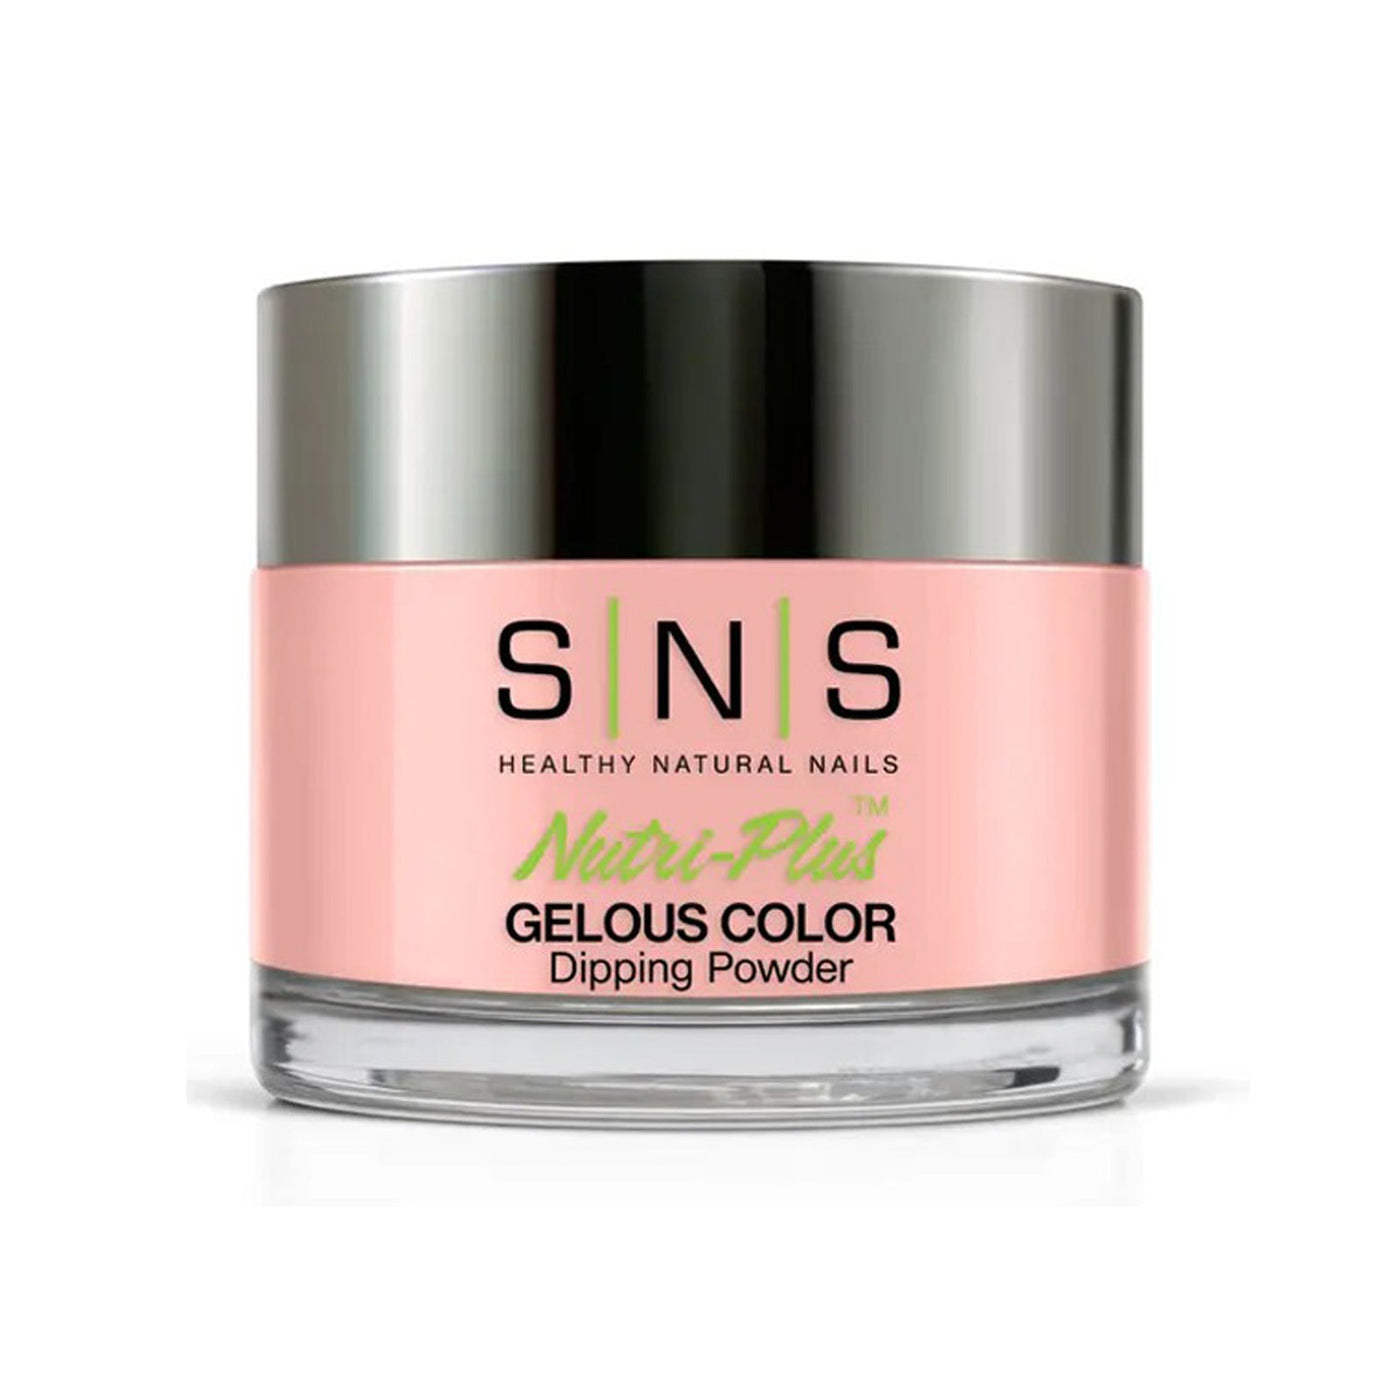 SNS Gelous Color Dipping Powder SL04 Dive Into Ecstasy (43g) packaging